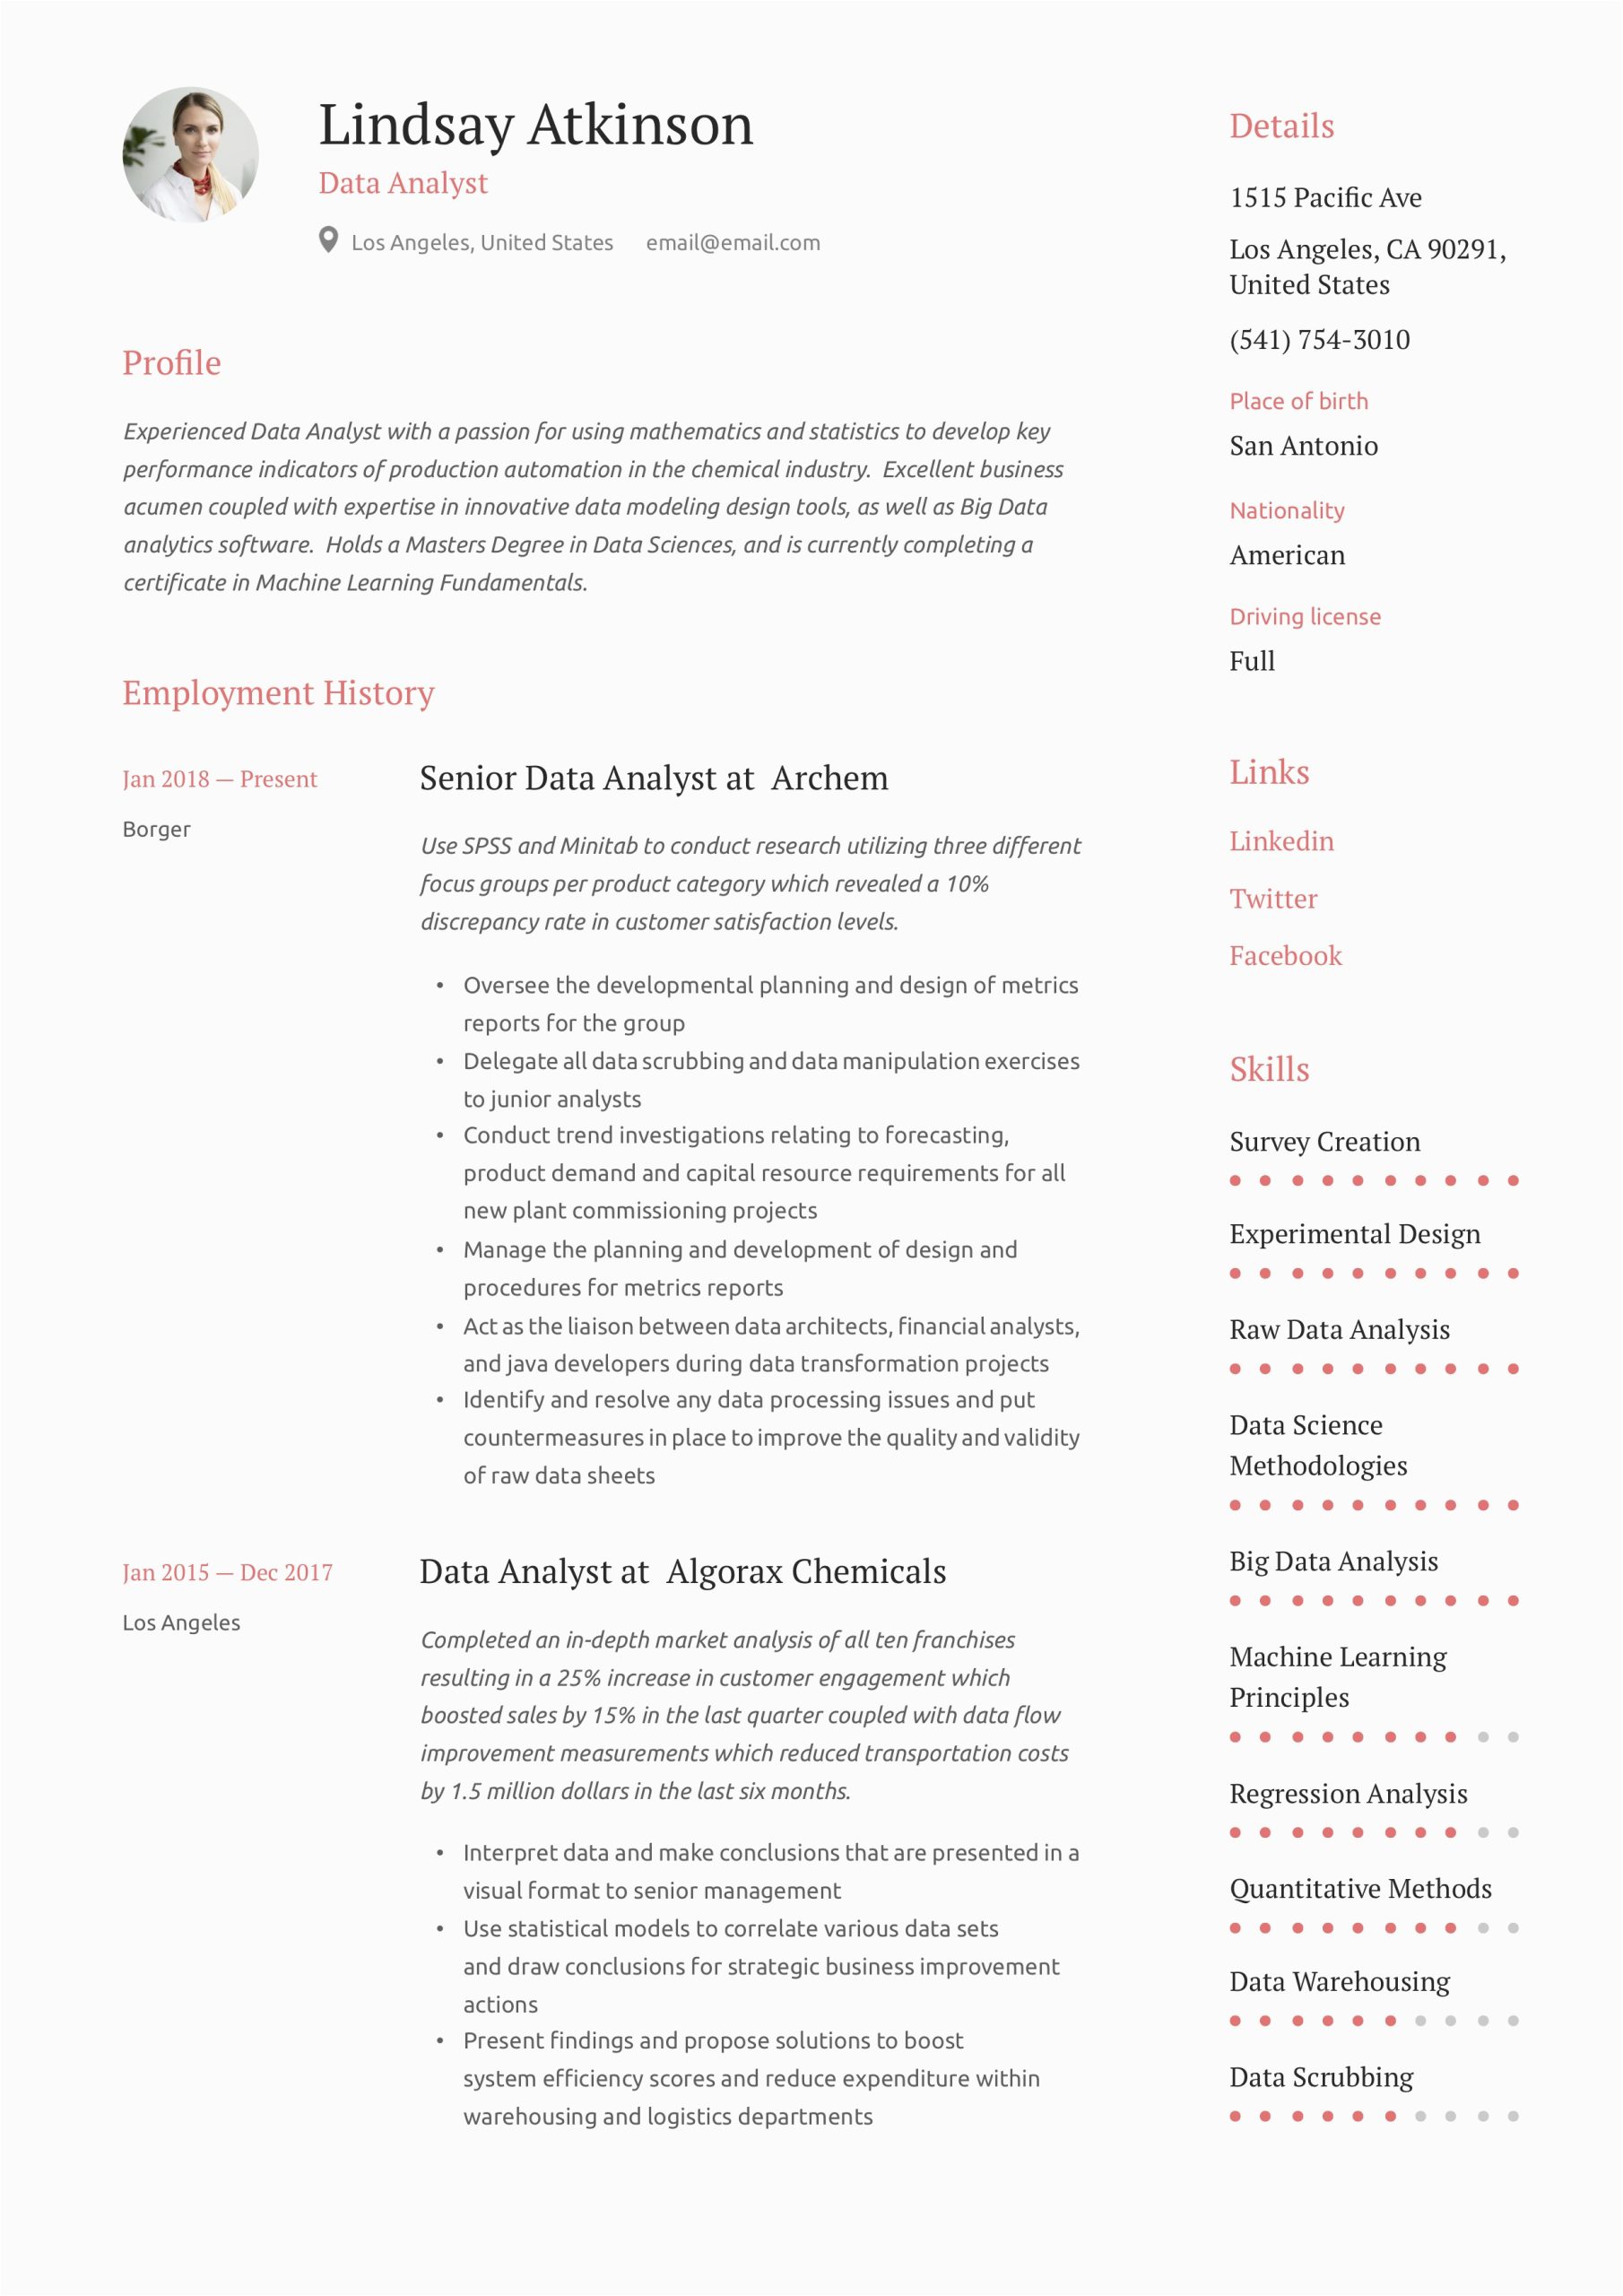 Data Analyst Job Description Samples for Resume Data Analyst Resume & Writing Guide 19 Examples